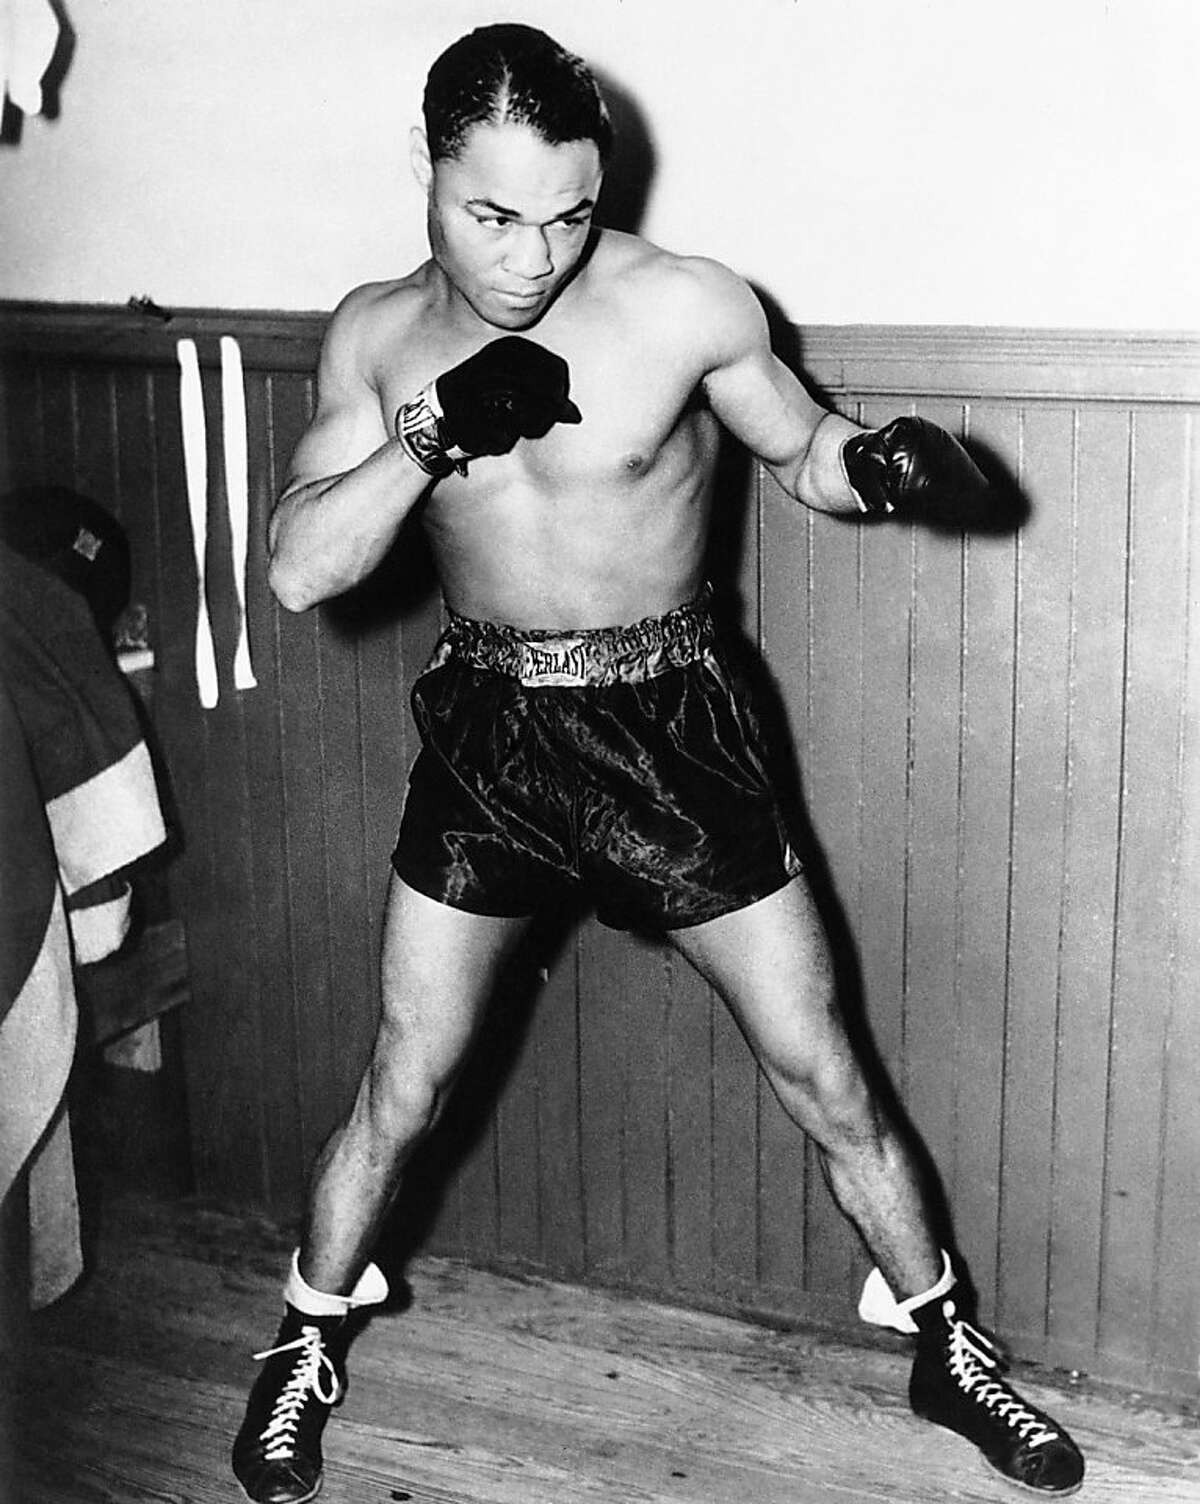 Vittorio Tafur's top 10 boxers of all-time